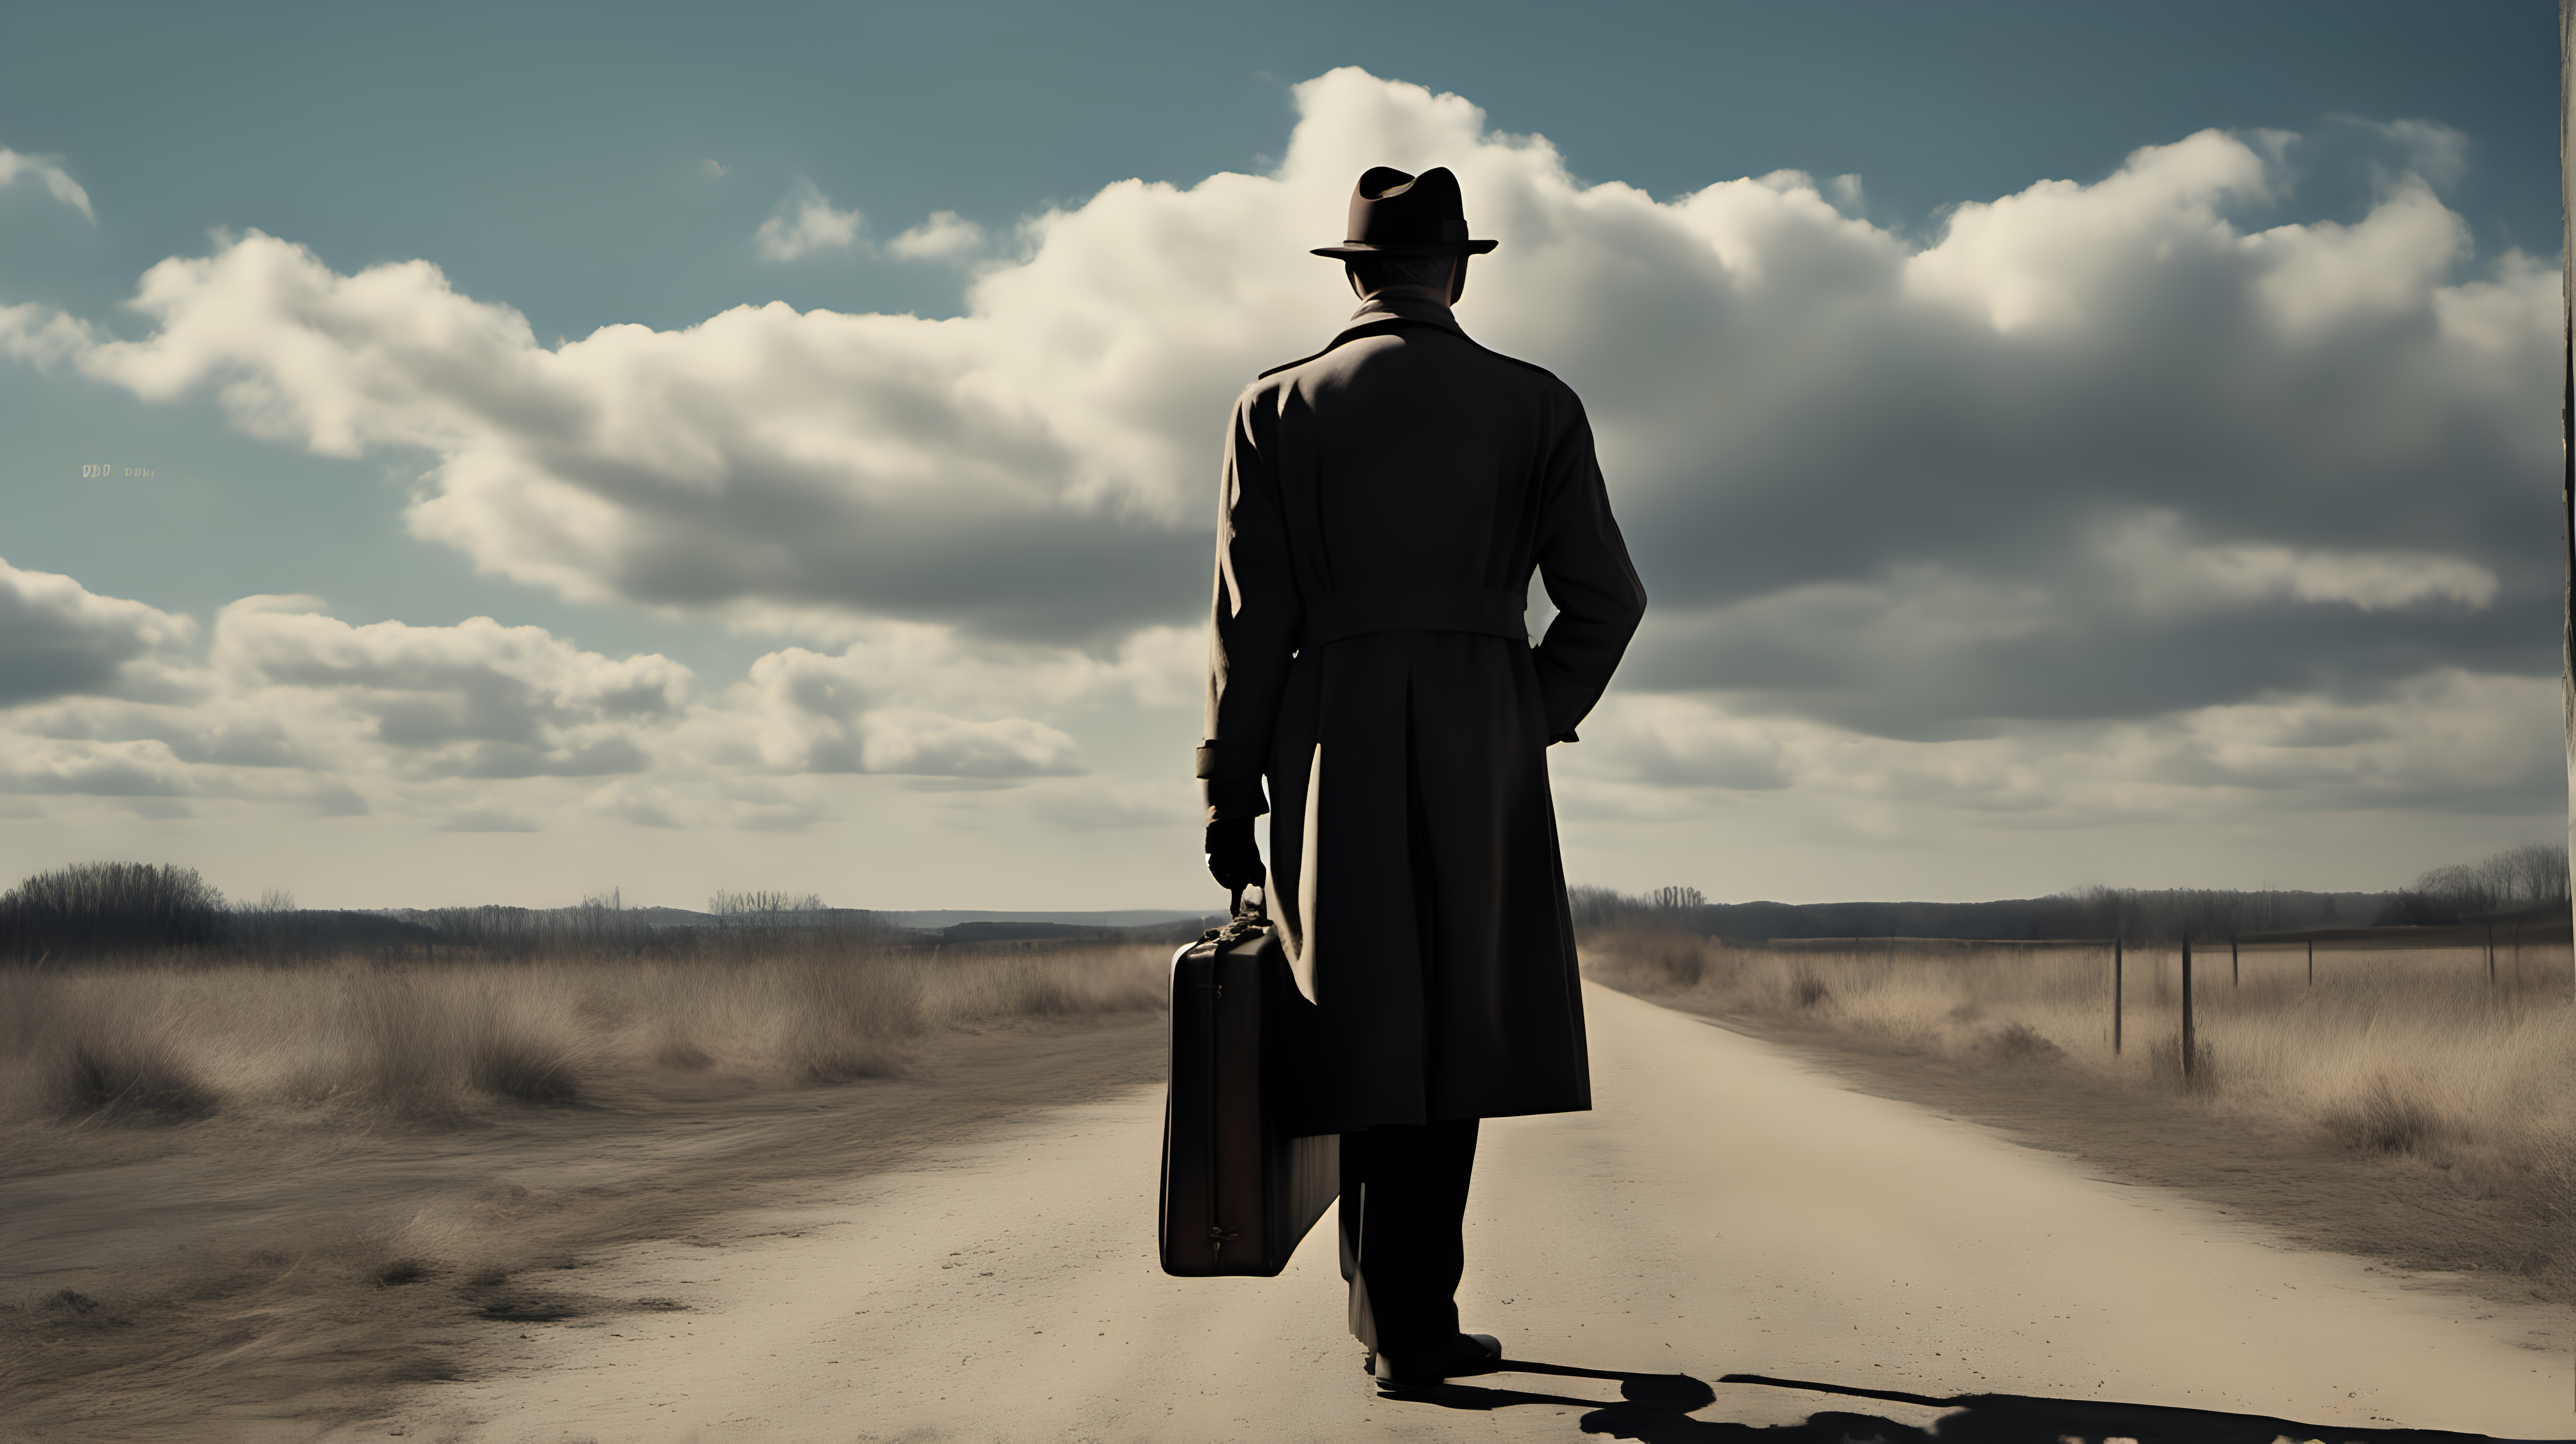 An old-fashioned spy, dressed in a tailored trench coat and wearing a fedora hat, with one hand on the brim of his hat, one hand on his briefcase. The scene is Mysterious, Observant, Contemplative. Vintage film camera. Prime Lens. The sky is blue. Capturing the enigmatic and mysterious aura of the spy's persona. Emphasizing the spy's silhouette and the stark contrast between light and shadow, conveying a sense of intrigue and contemplation. 